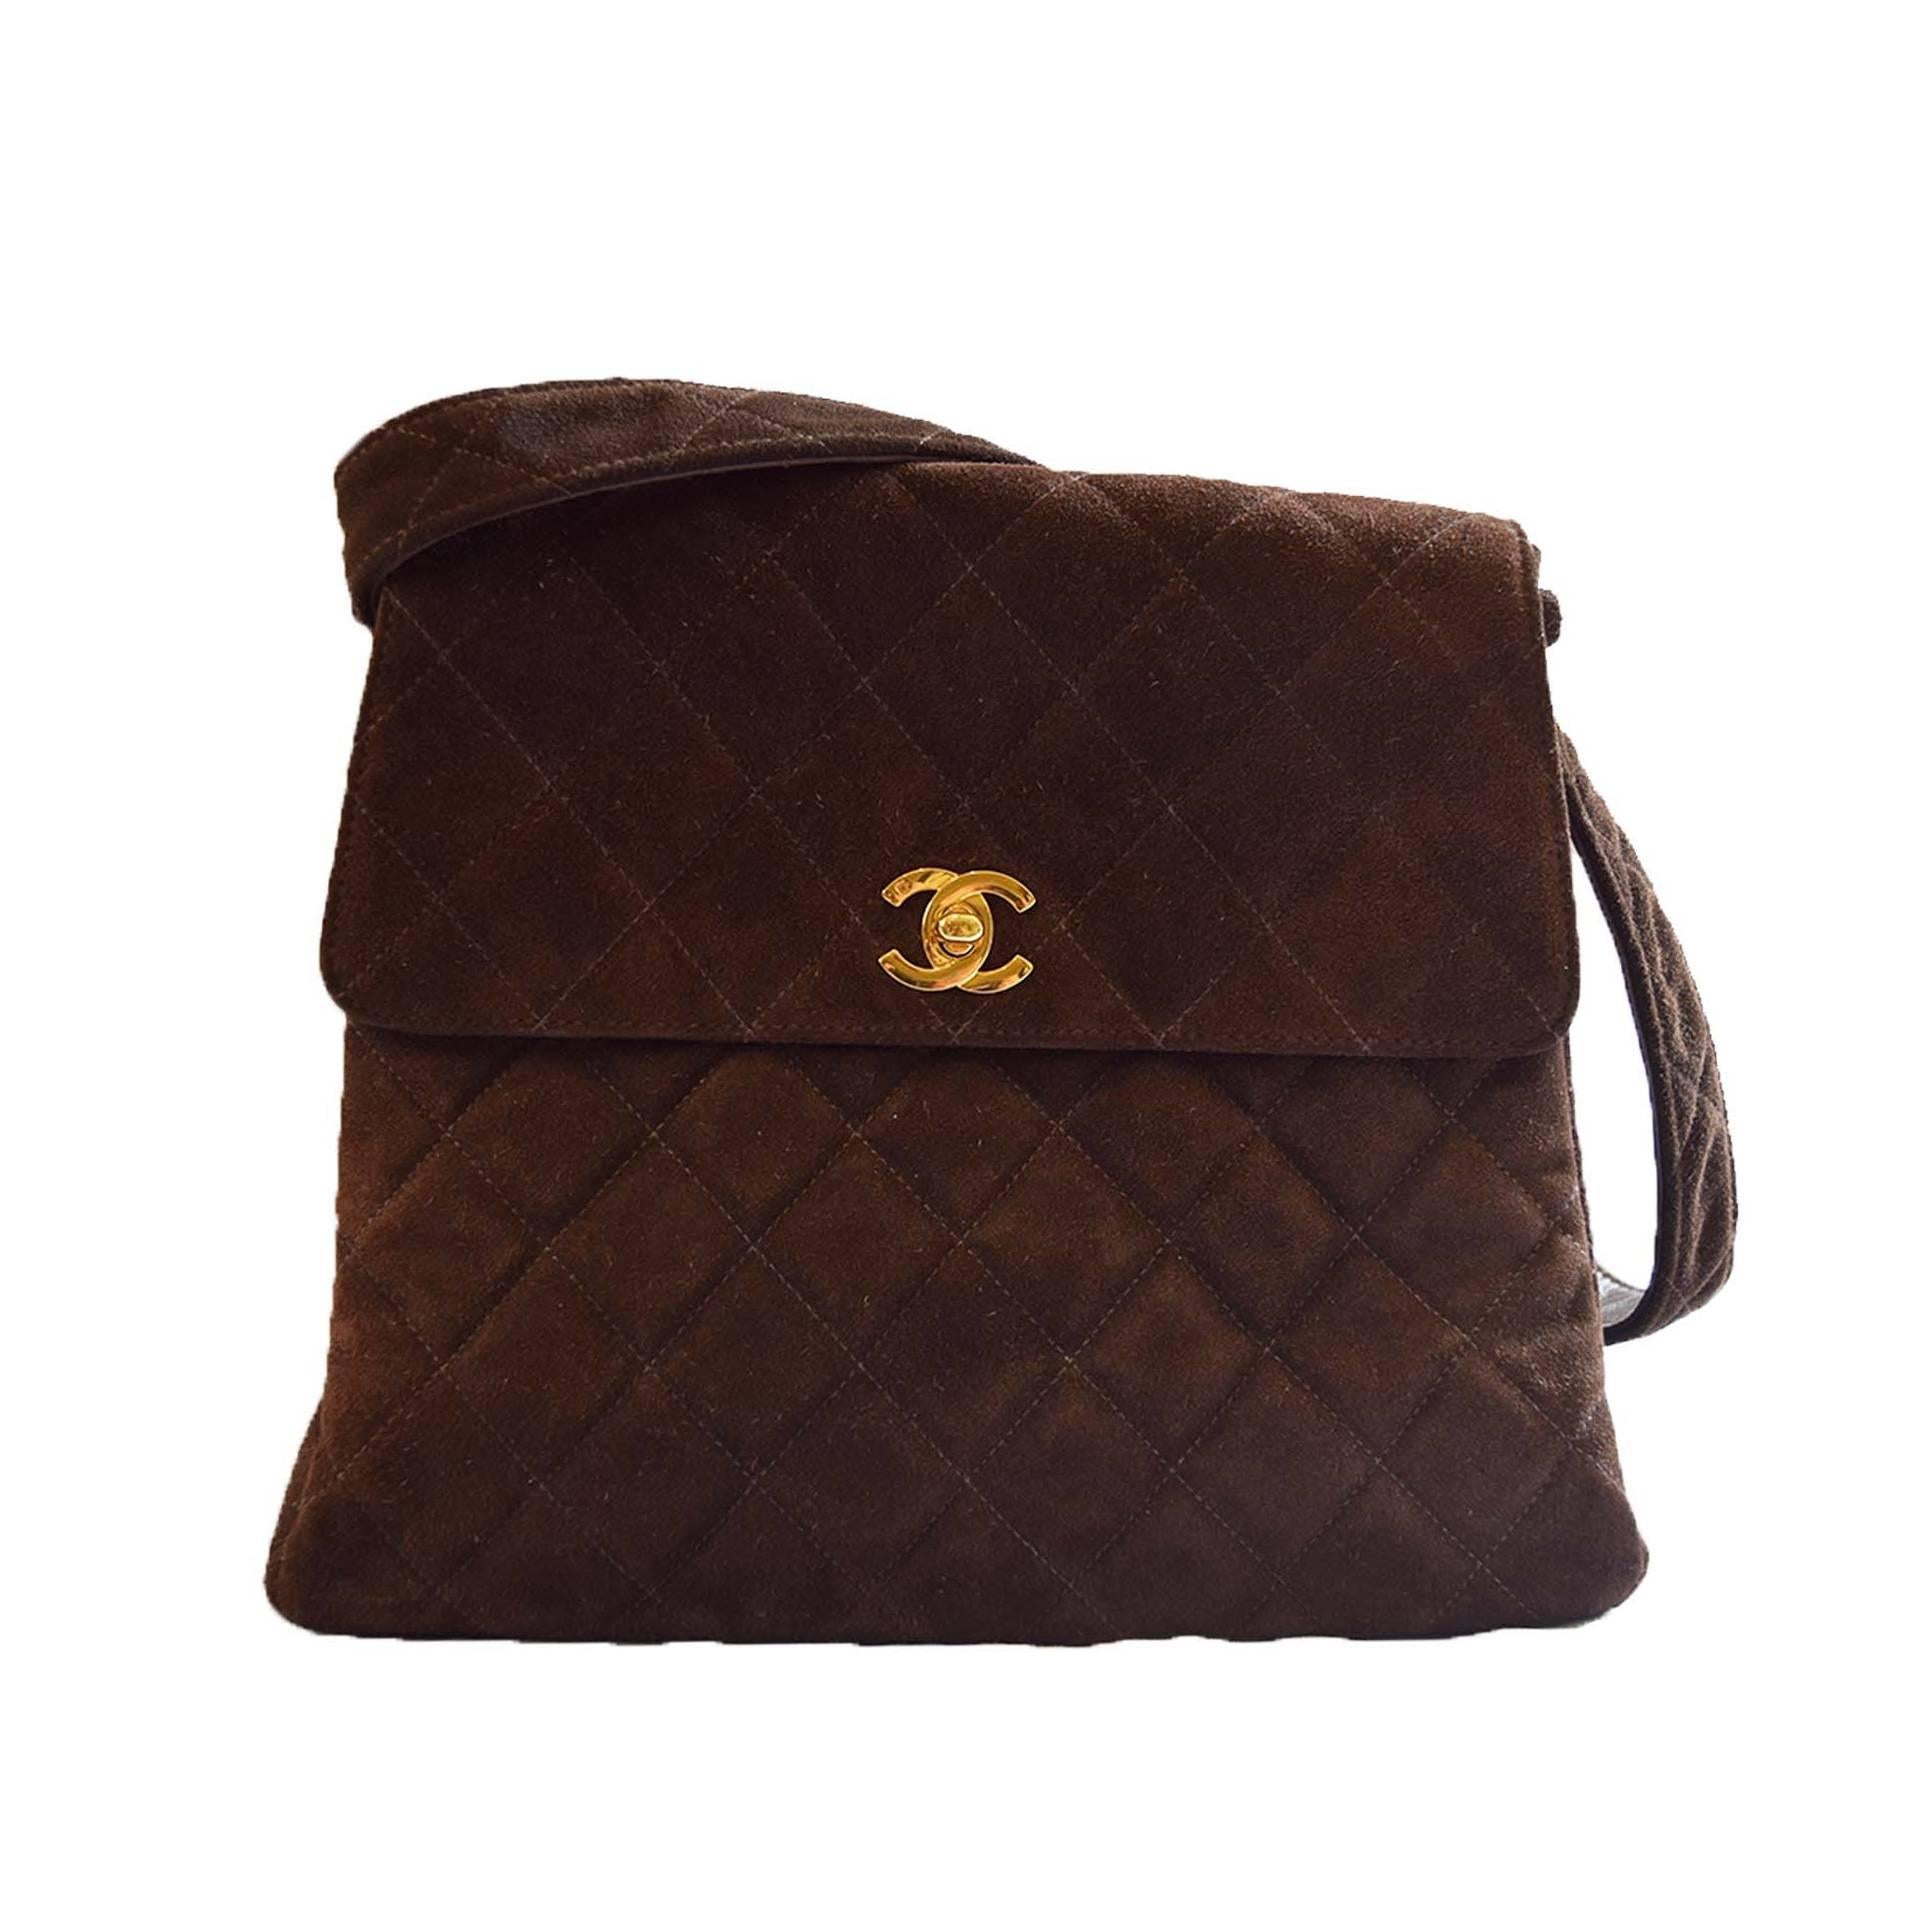 Chanel quilted brown suede handbag 1998